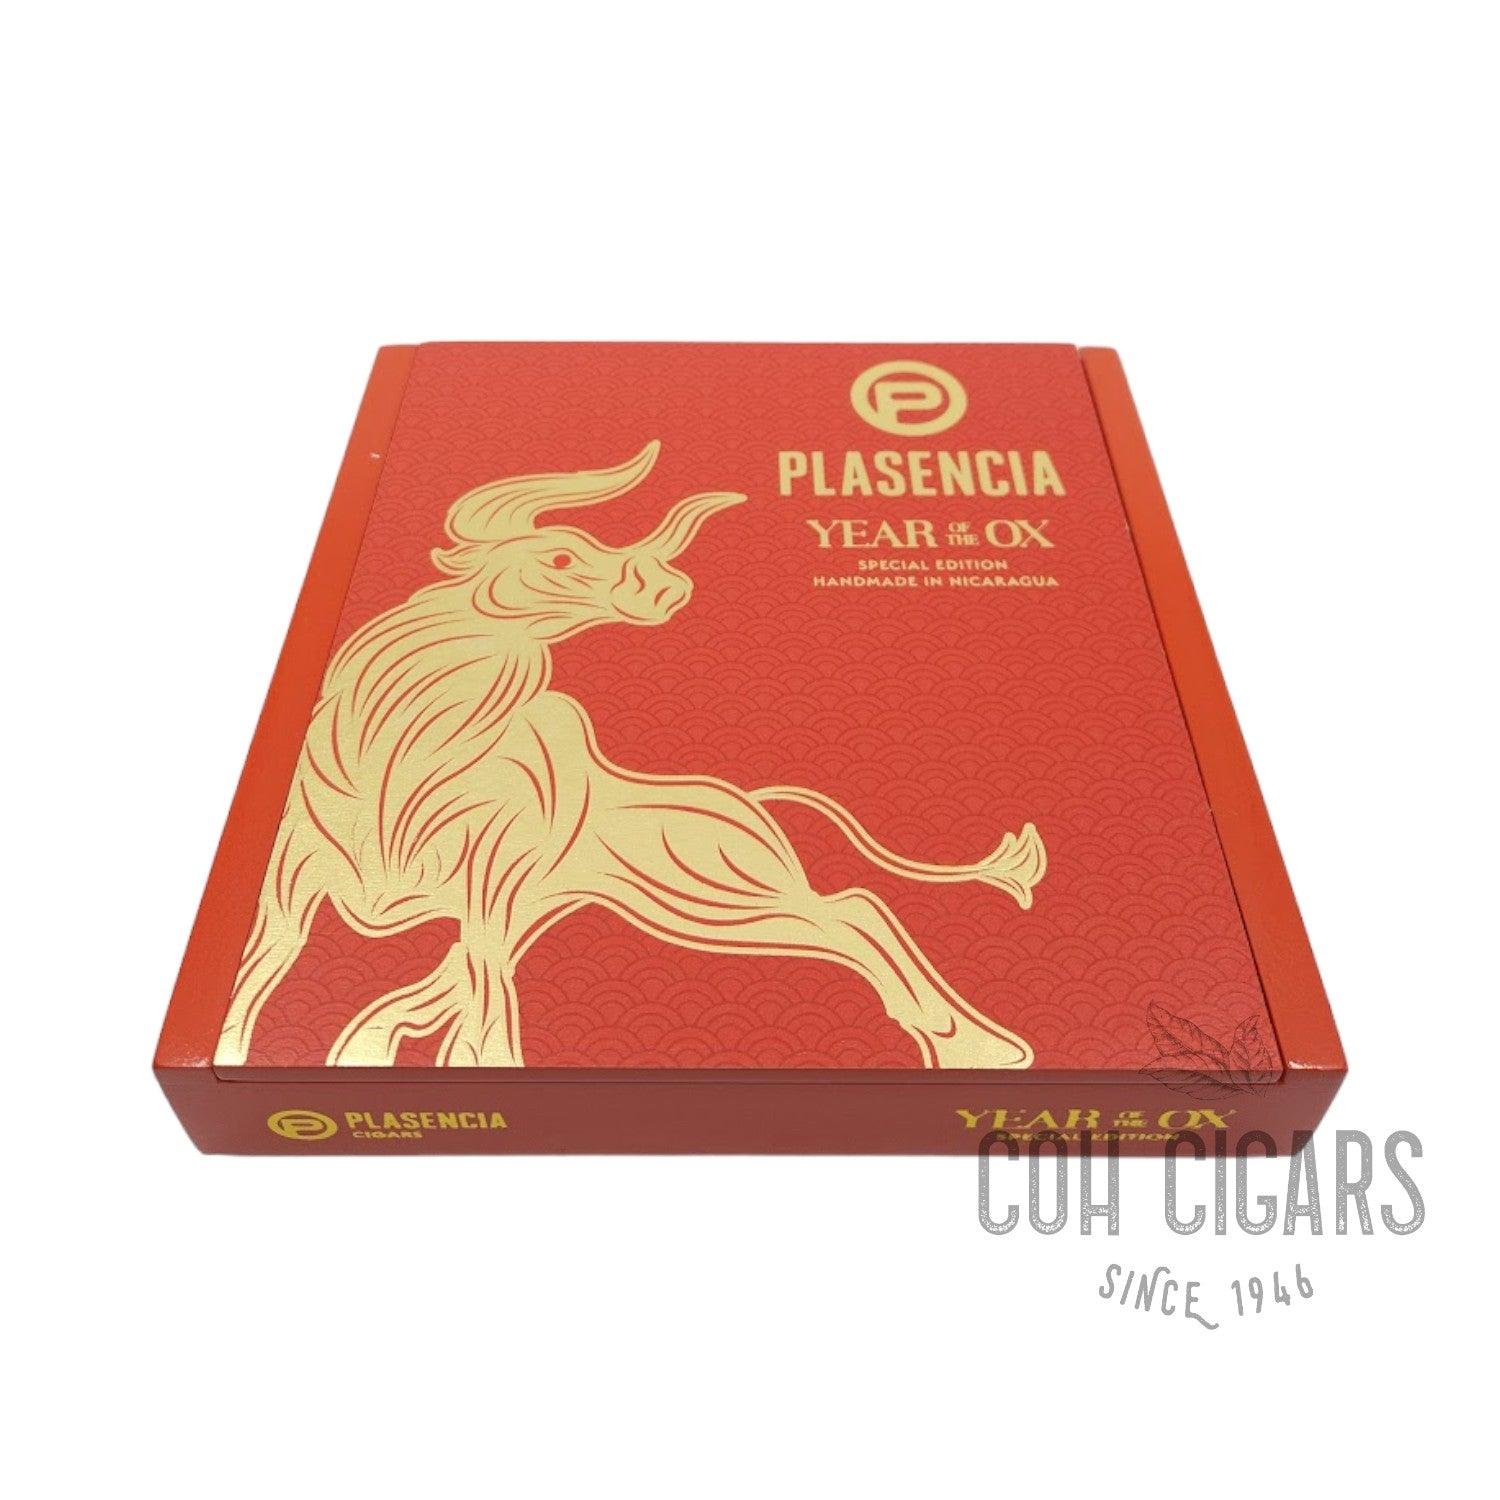 Plasencia Cigar | Year of the OX Special Edition | Box 8 - hk.cohcigars